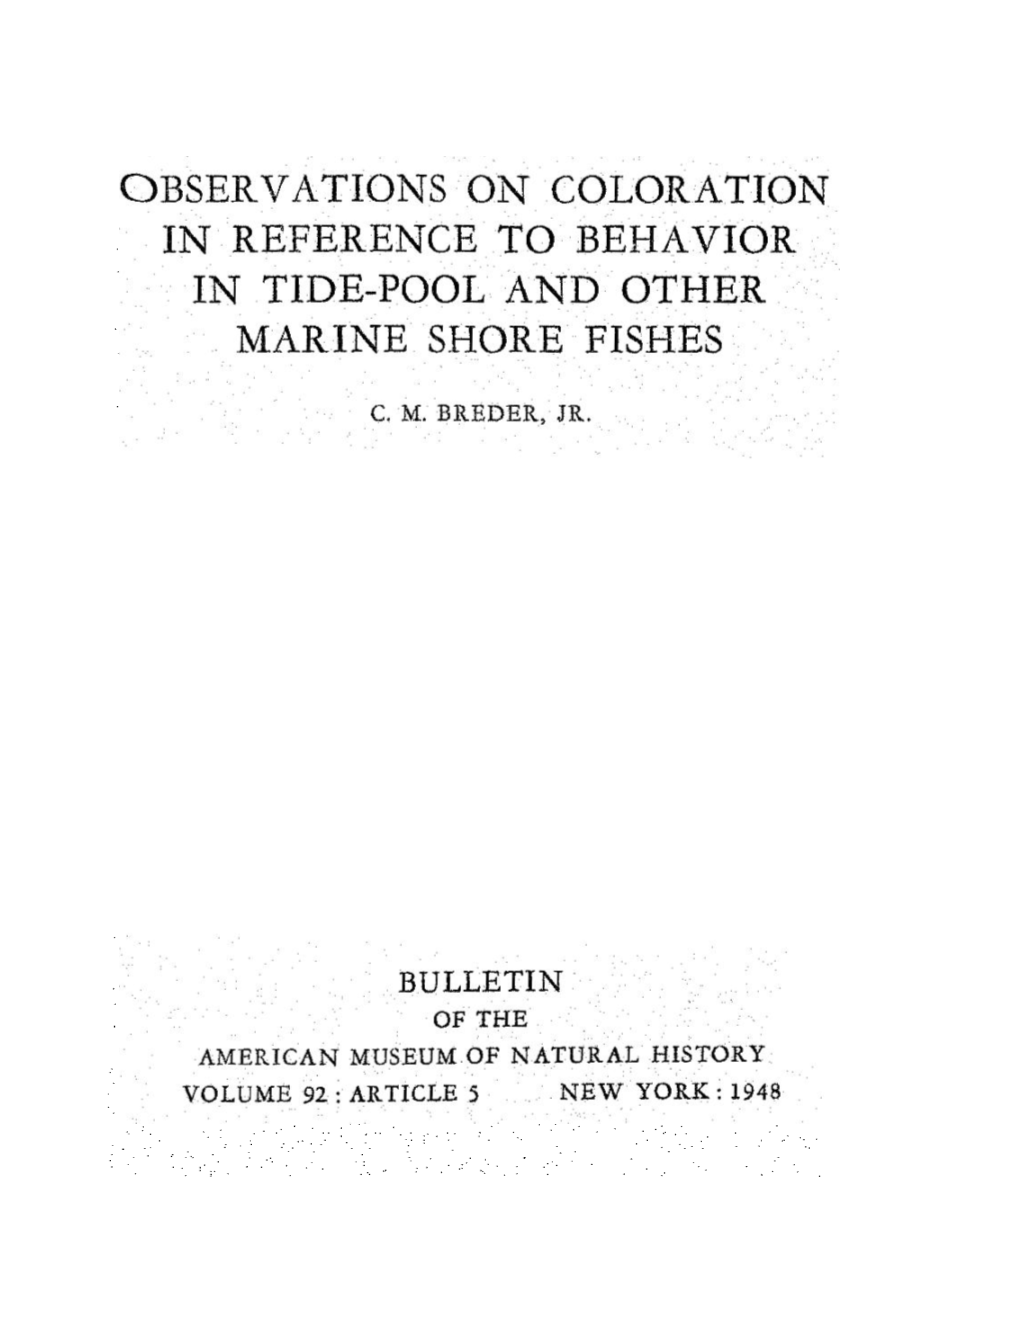 C)Bservations on Coloration in Reference to Behavior in Tide-Pool and Other Marine Shore Fishes